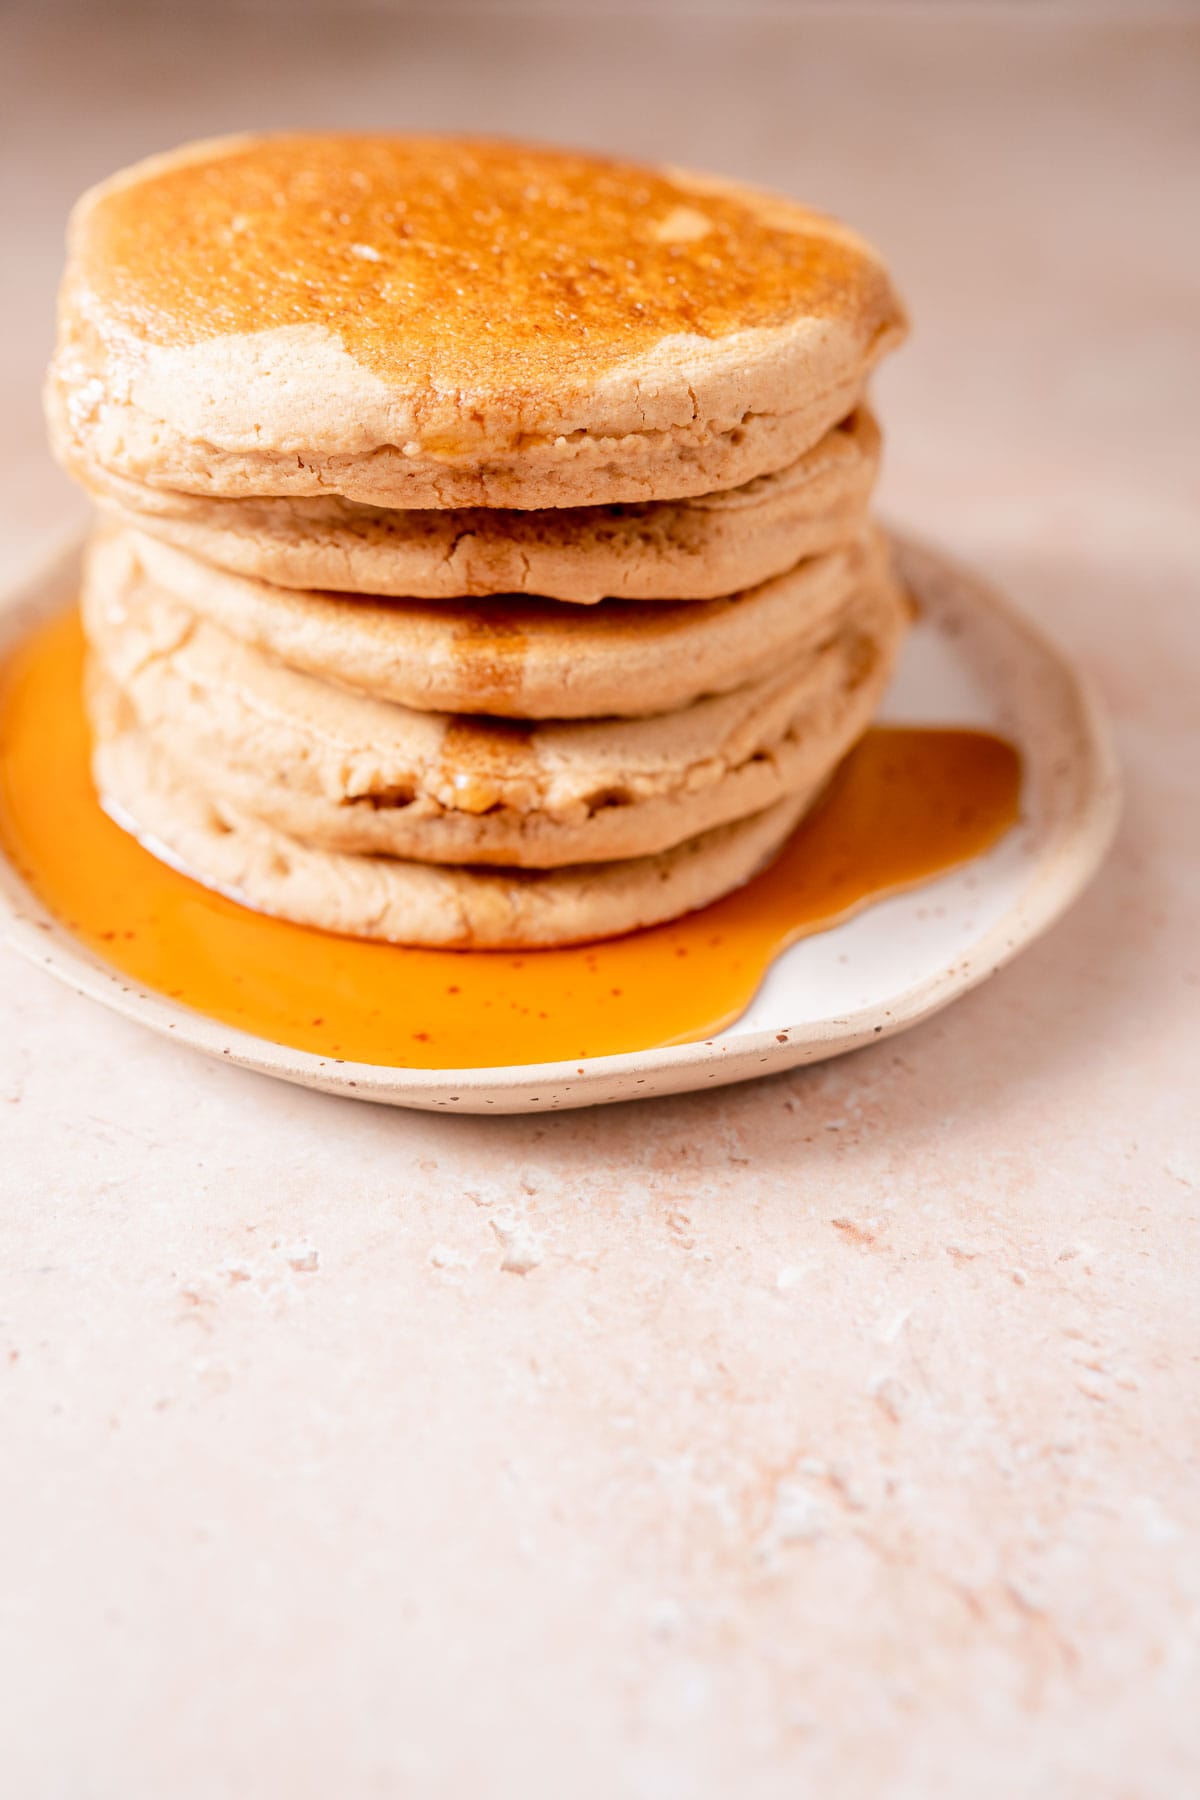 A stack of pancakes drizzled with maple syrup resting a ceramic plate.